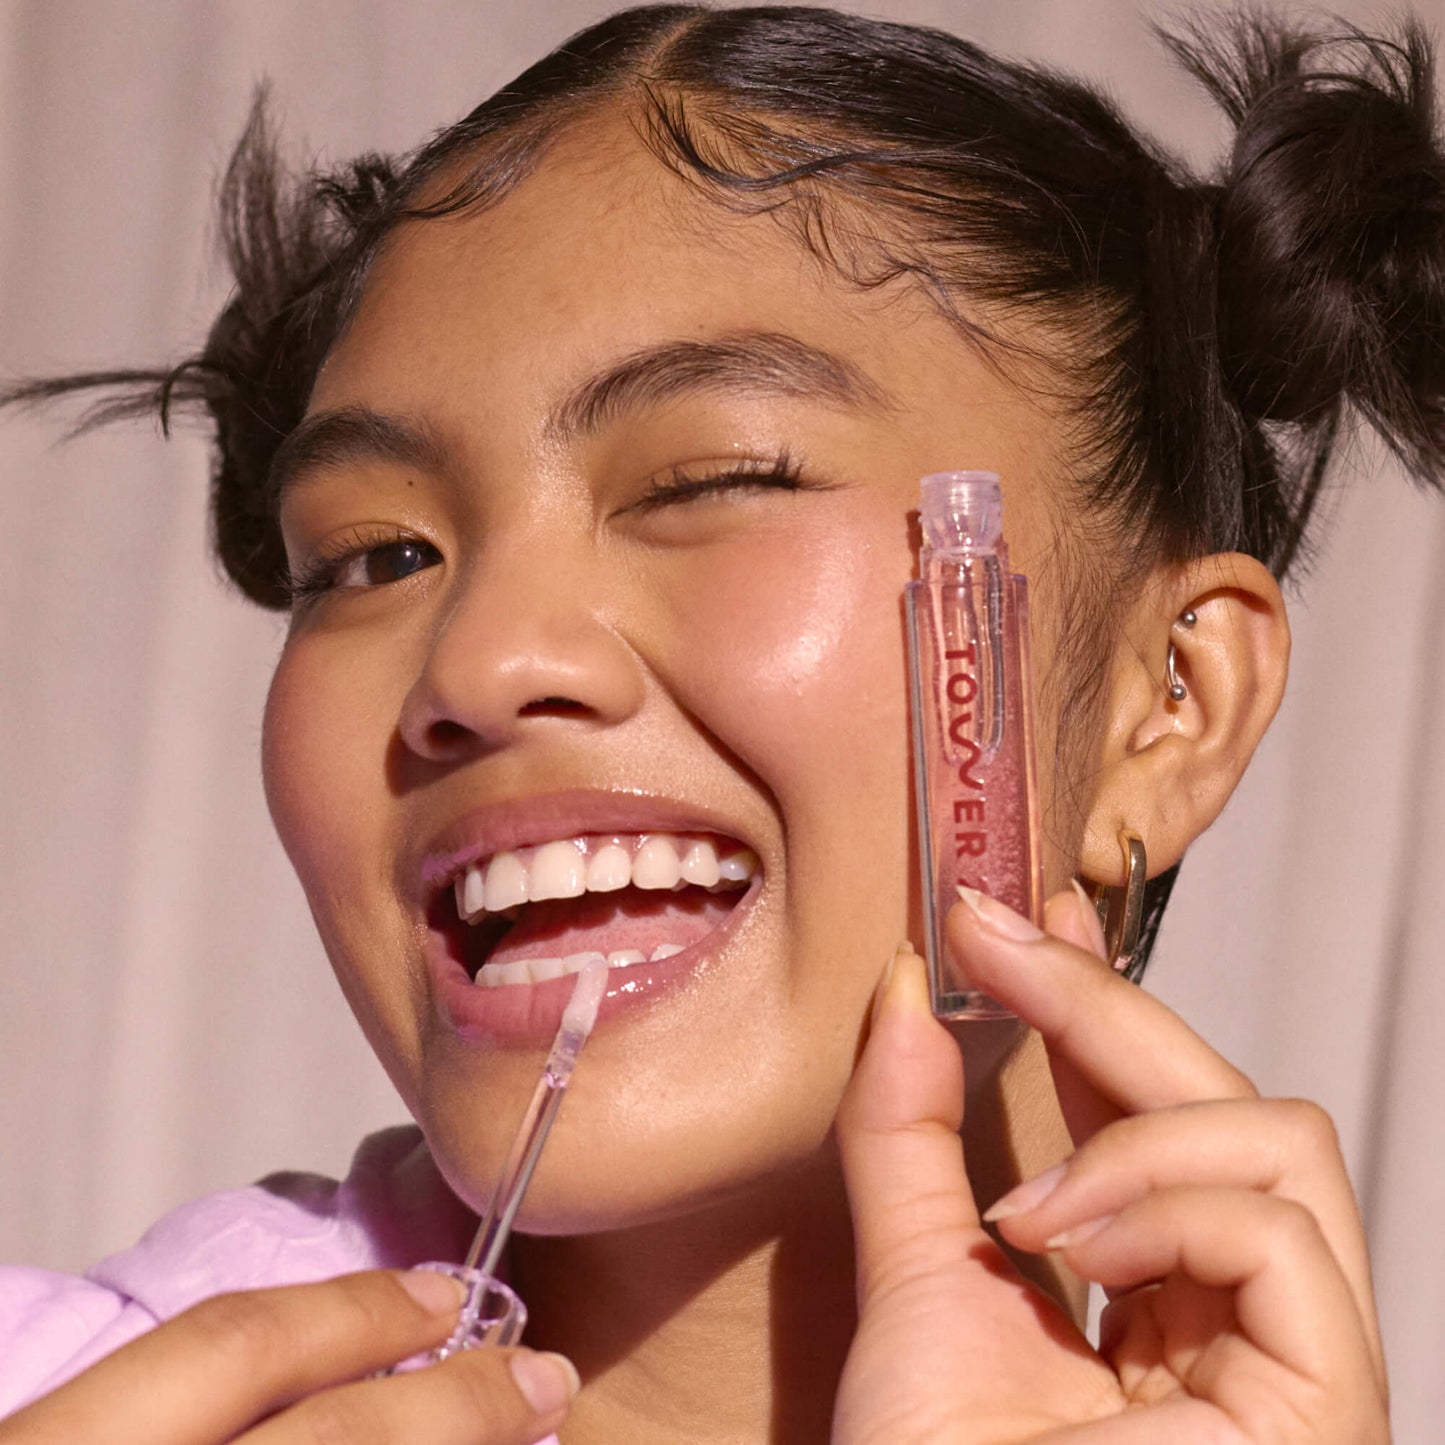 Chill [Shared: Model applying Limited Edition ShineOn Lip Jelly "Lip Drip Duo" featuring the shade Chill]